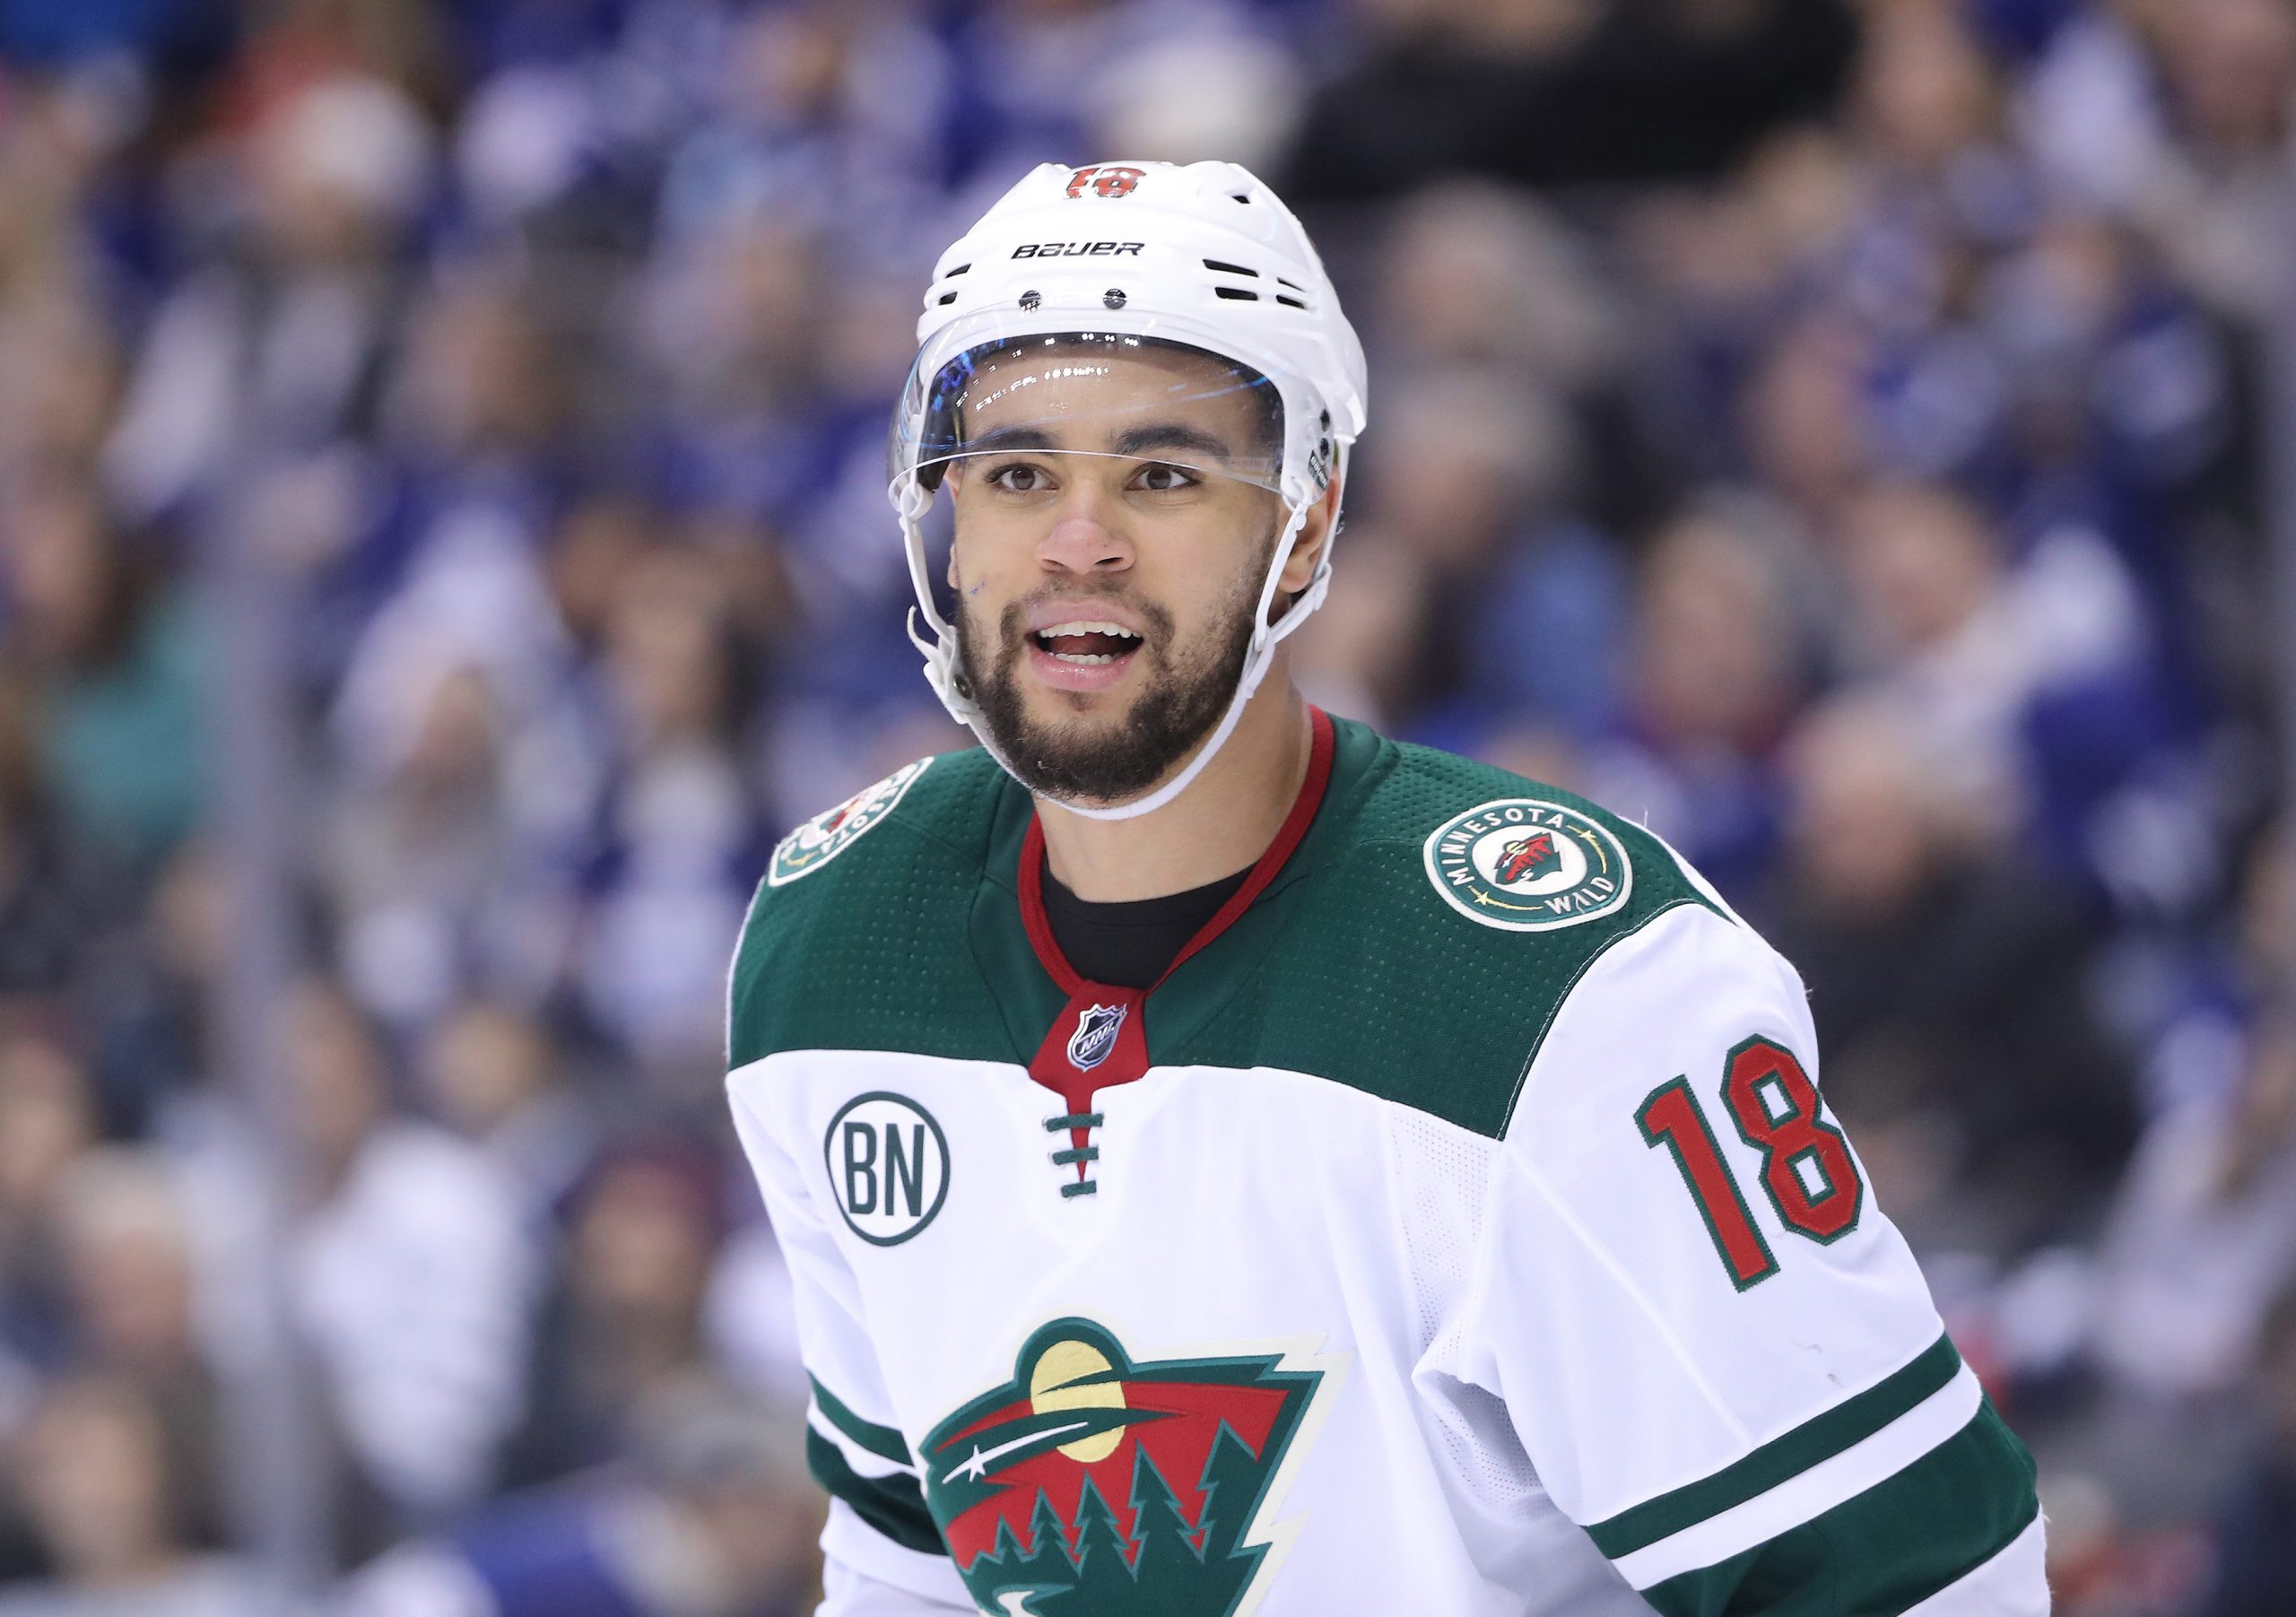 Jordan Greenway could be moved if the Minnesota Wild want to make